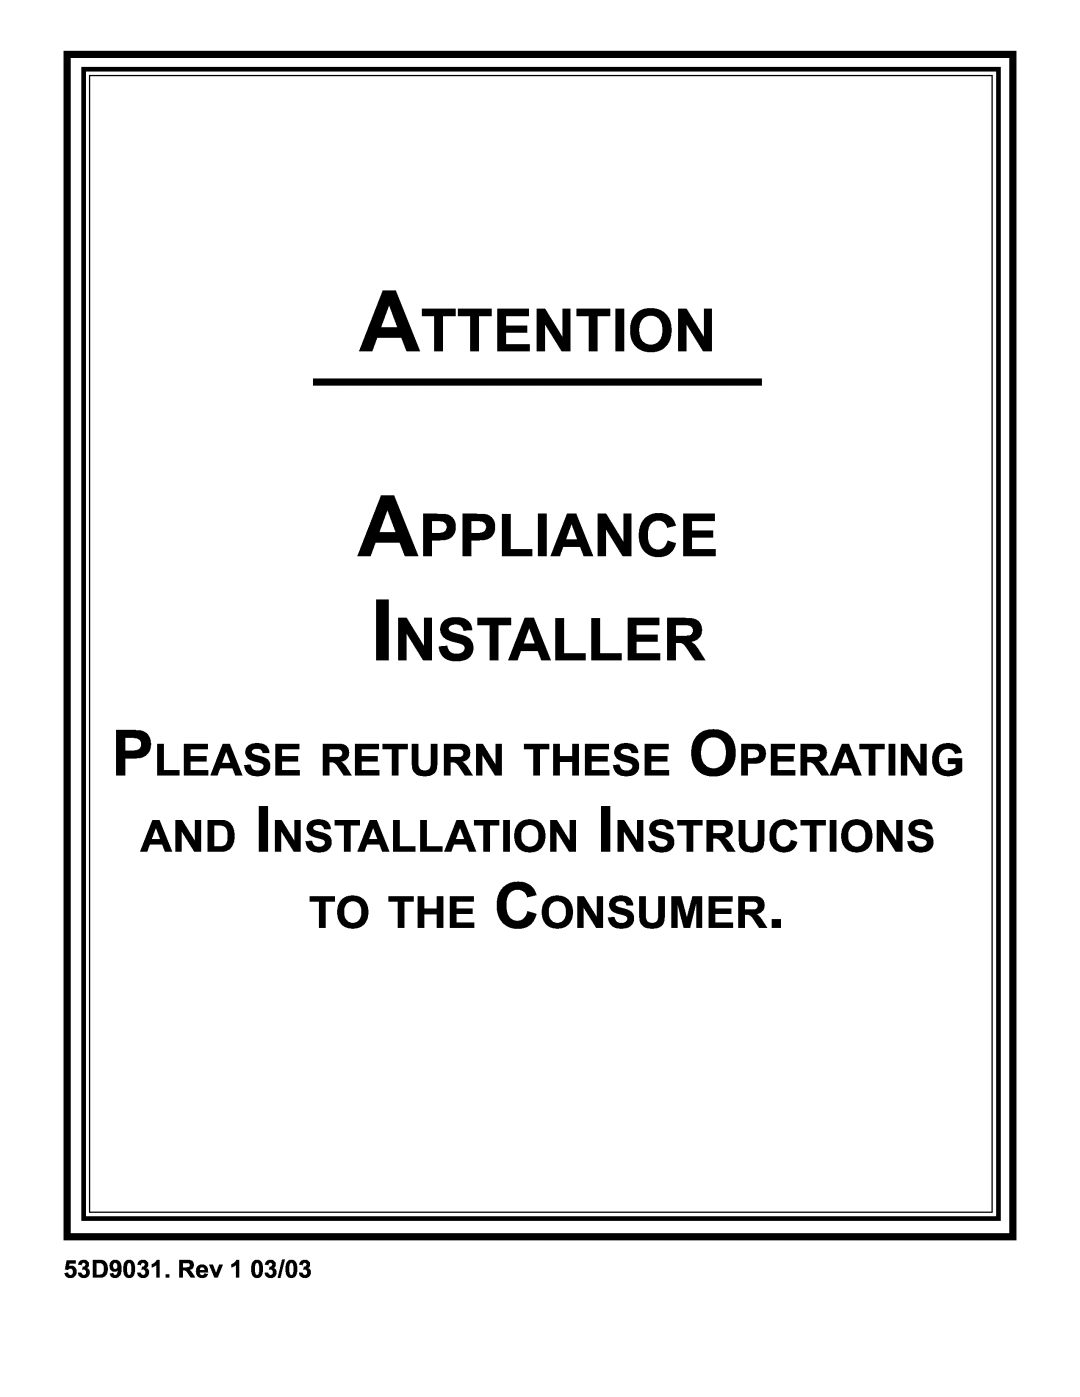 Monessen Hearth BWB400 Appliance Installer, Please Return These Operating And Installation Instructions, To The Consumer 